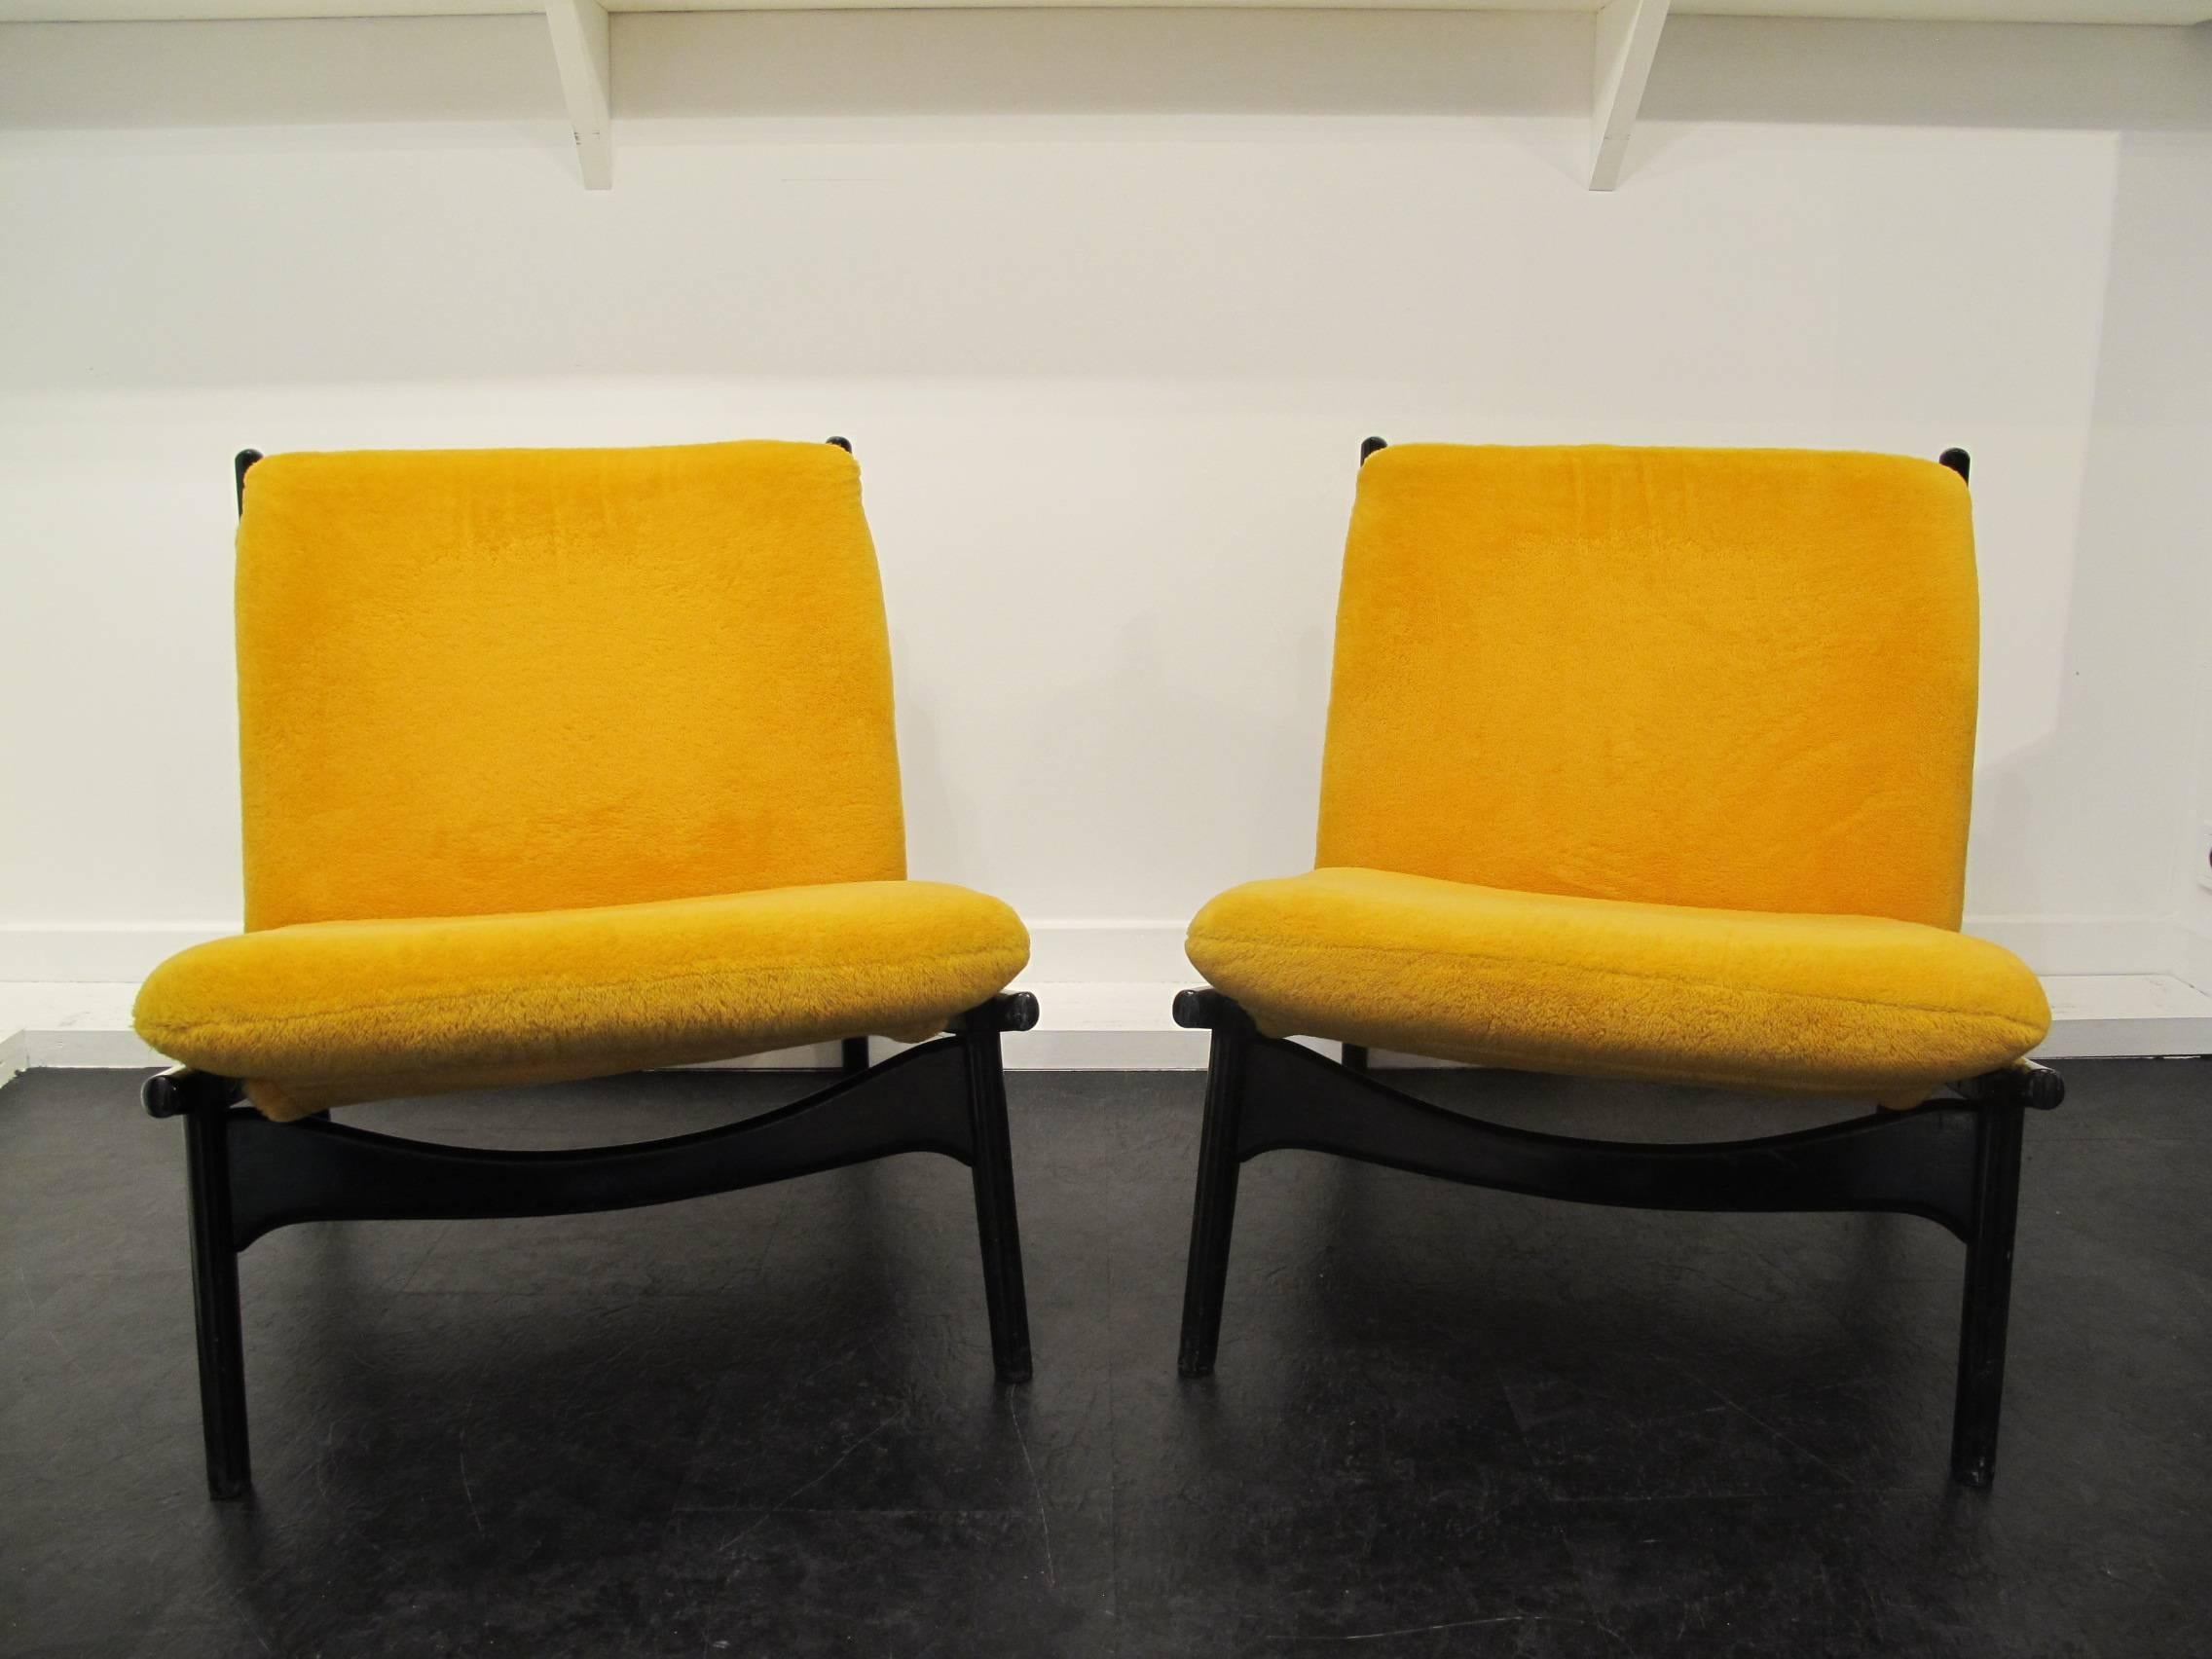 Pair of lounge chairs, model "790", designed by Joseph André Motte 
(1925-2013) for Steiner, France 1960.